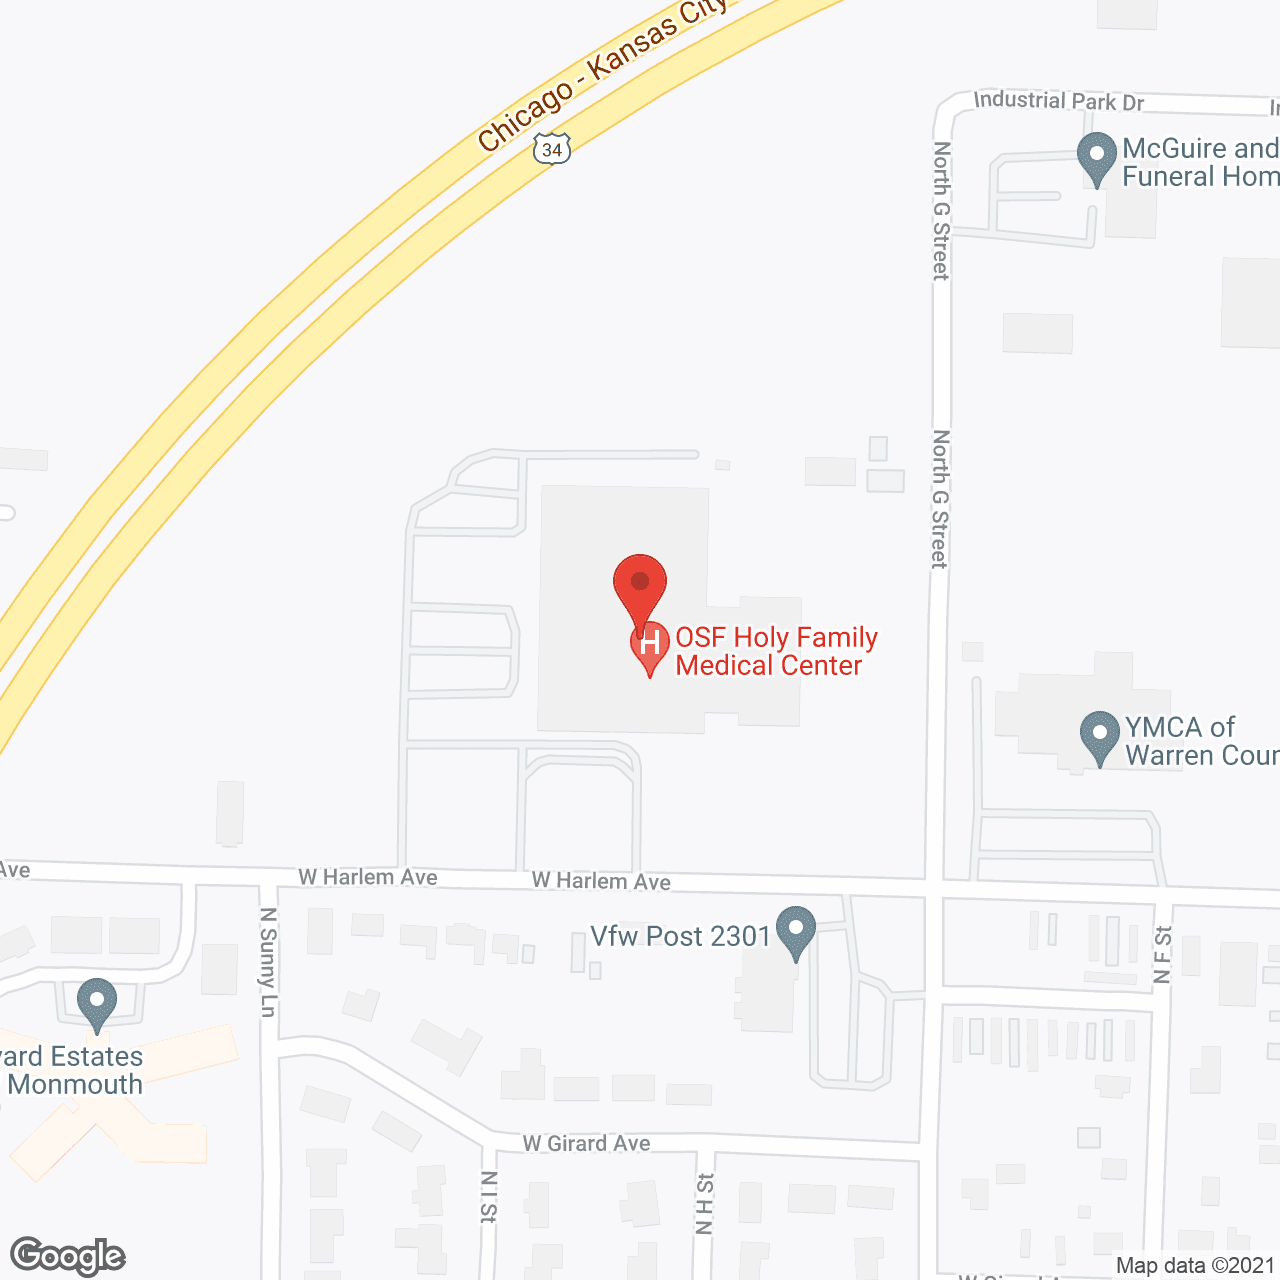 Community Medical Ctr of W Il in google map